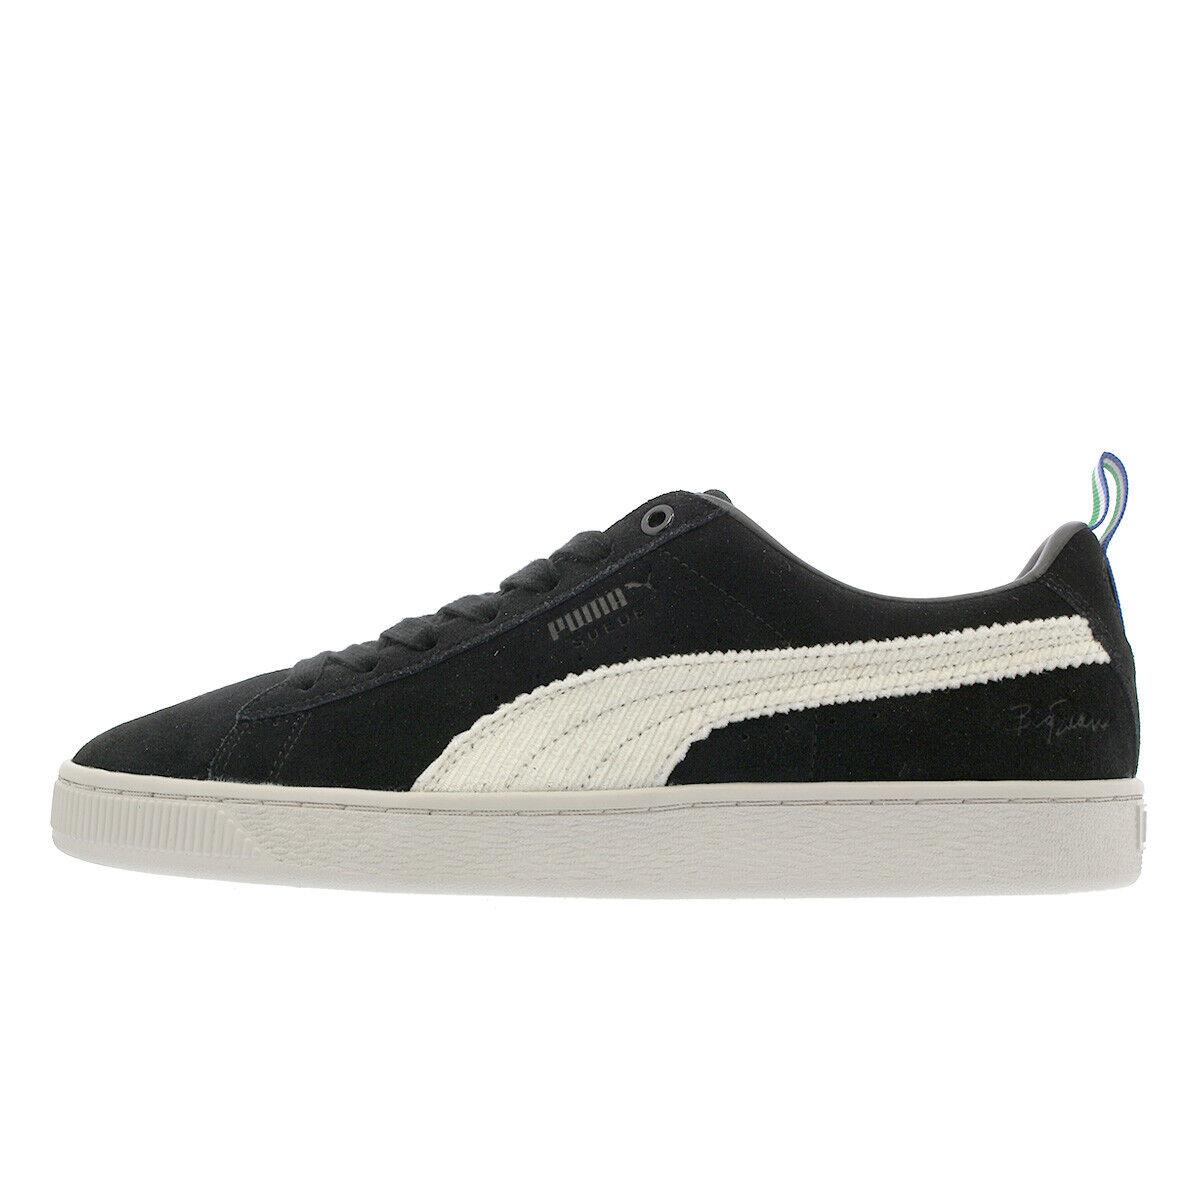 Puma Suede Black White Big Sean Leather Lace Up Mens Trainers 367407 01 Y46B